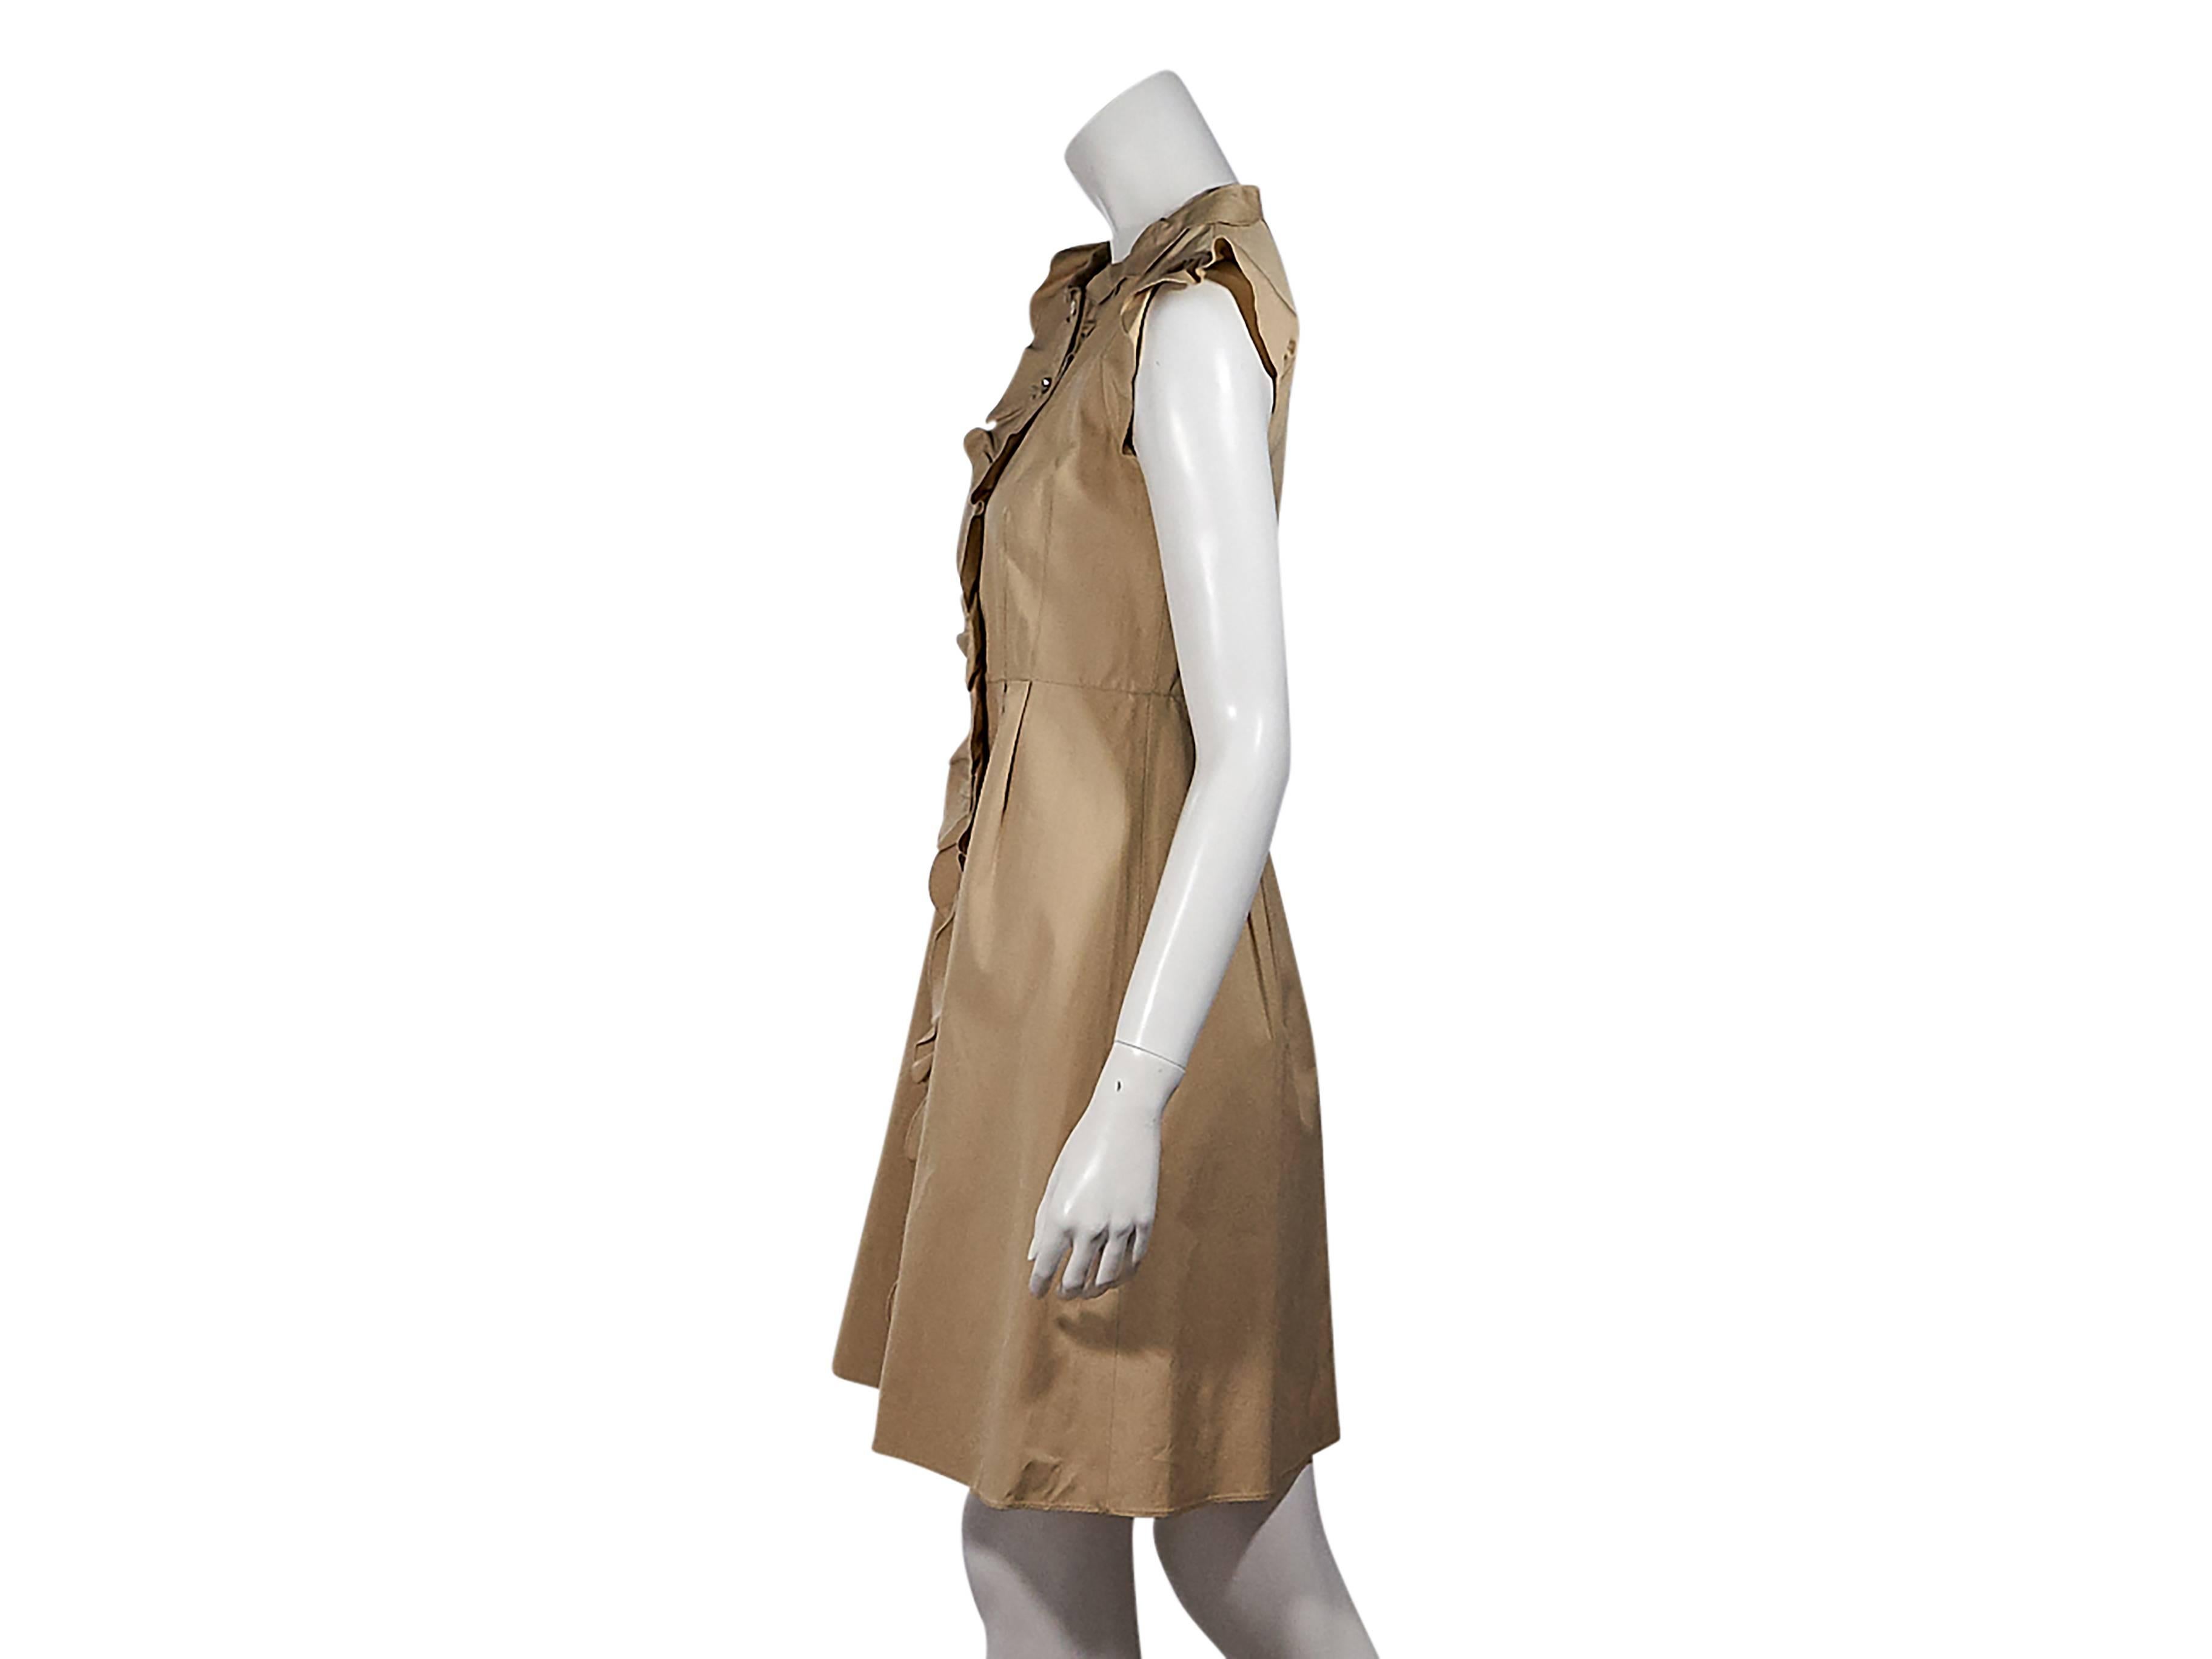 Product details:  Tan ruffled shirt dress by Valentino.  Crewneck.  Ruffled cap sleeves.  Button-front closure.  Pleats taper off waist. Size 6
Condition: Pre-owned. Very good.

Est. Retail $ 2,300.00
